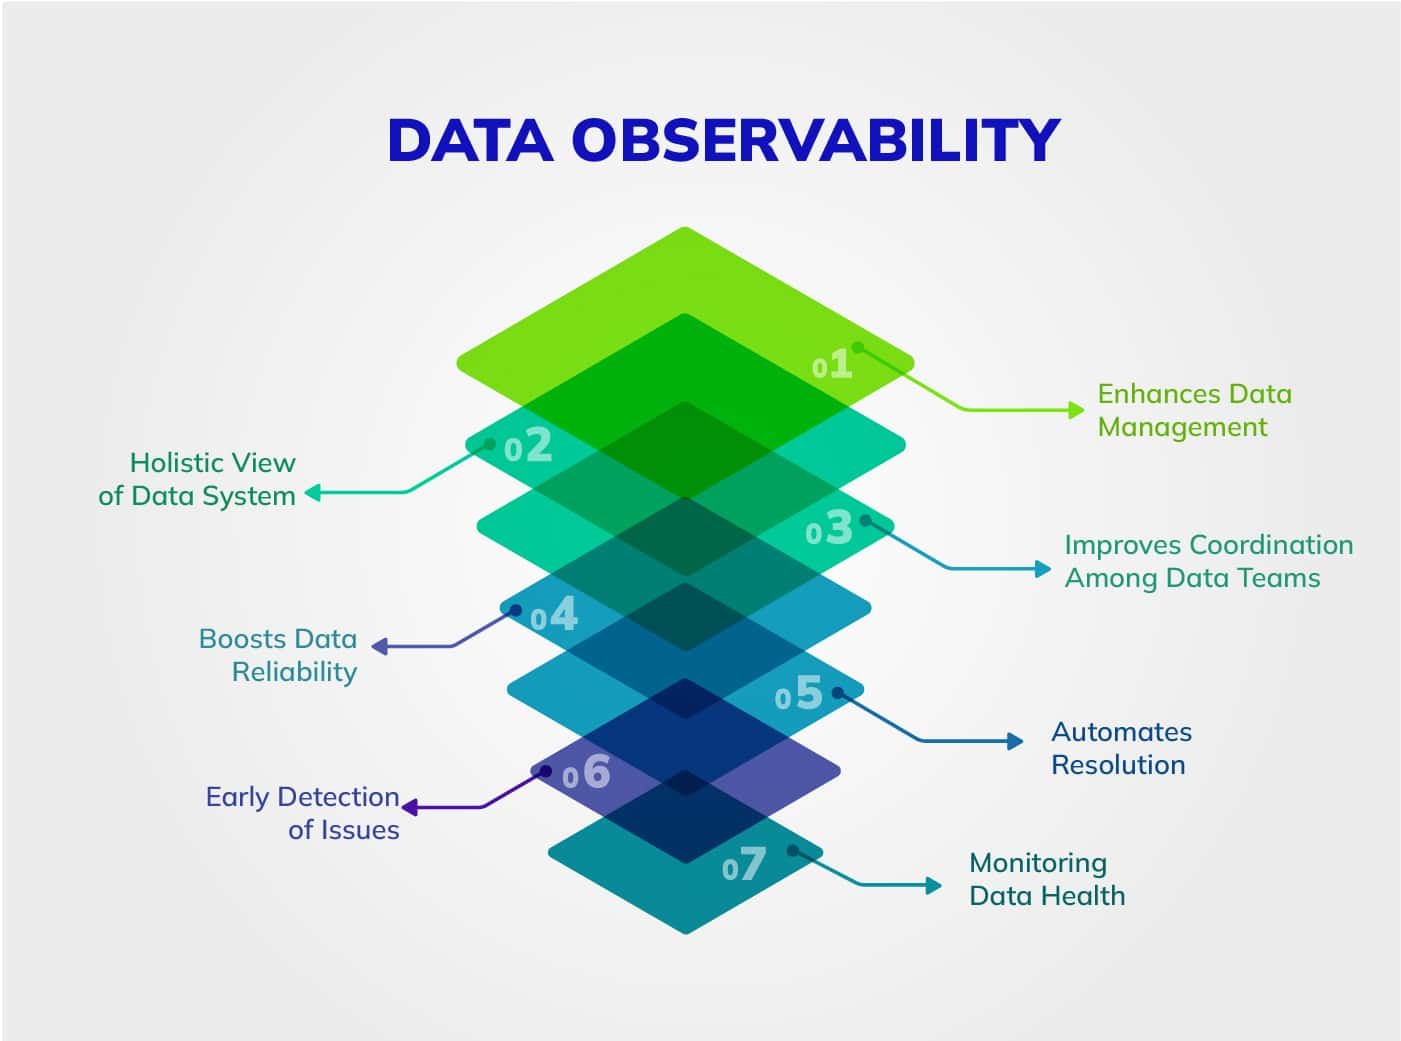 Tools Used in Data Observability